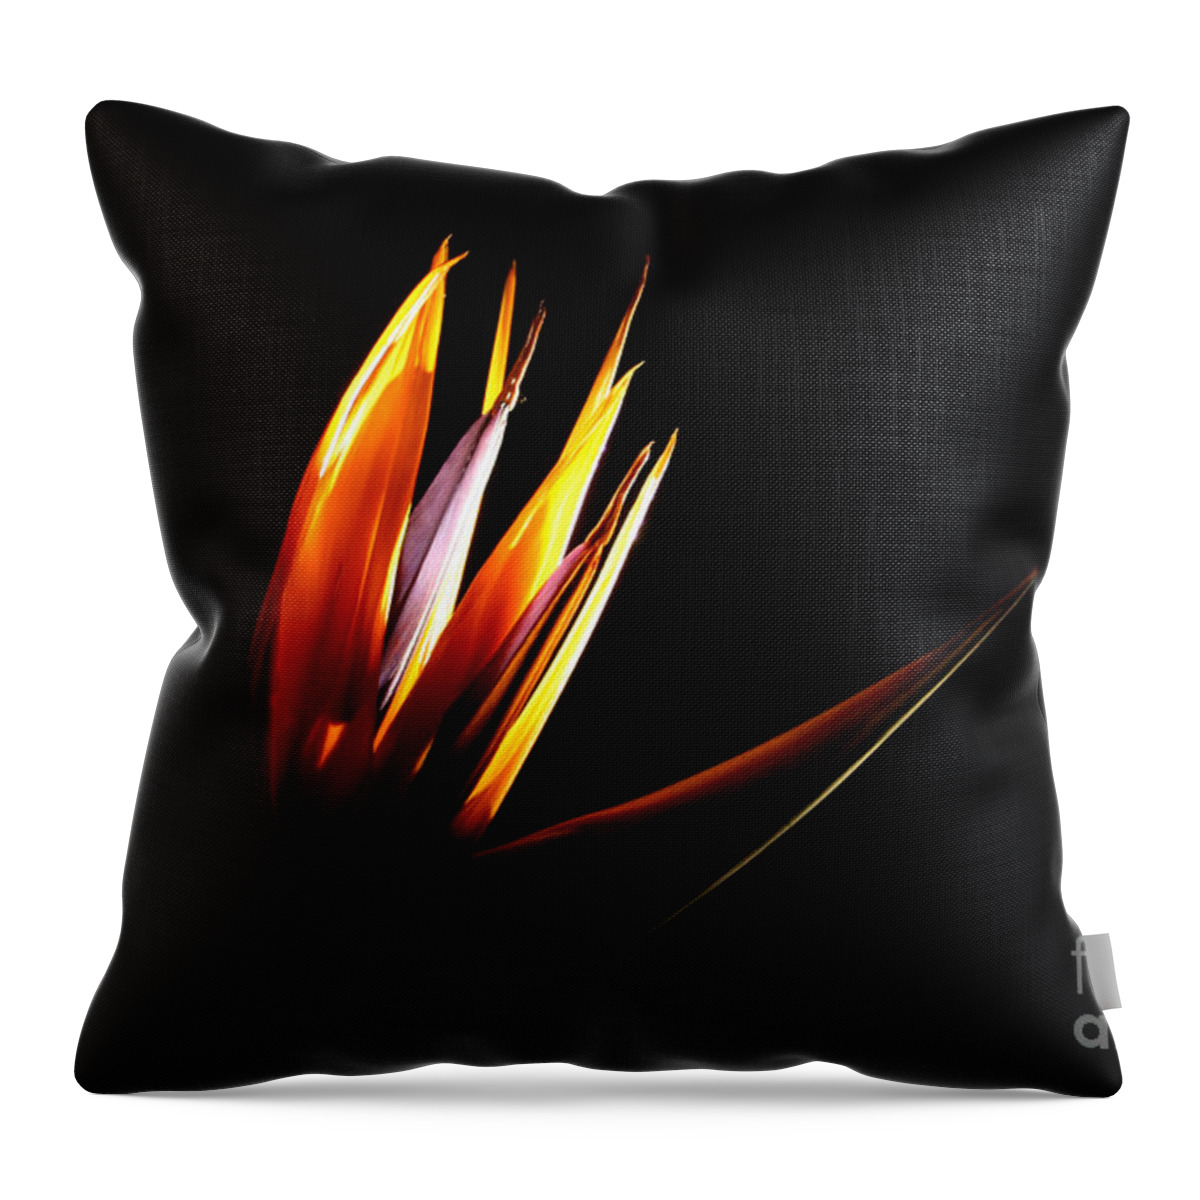 Photography Throw Pillow featuring the photograph Flor Encendida Detalle by Francisco Pulido